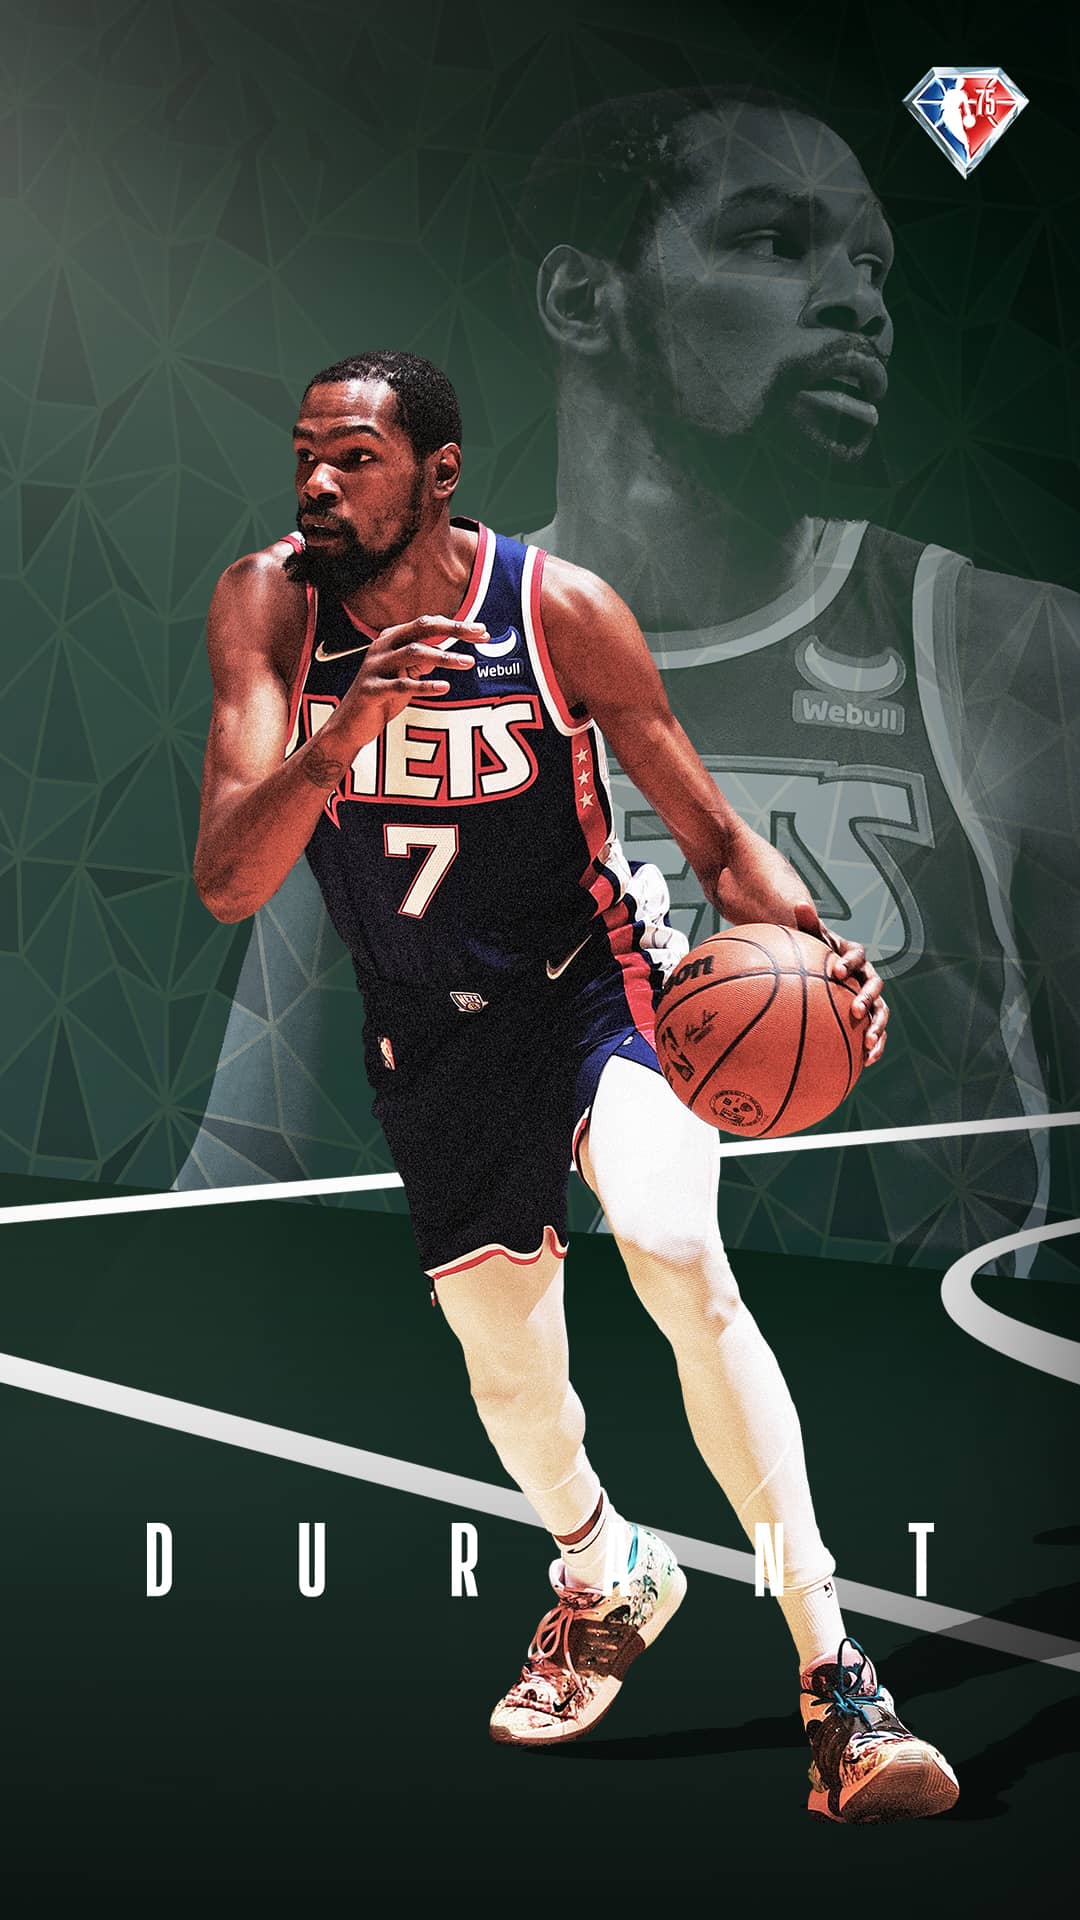 wallpaper kevin durant jersey